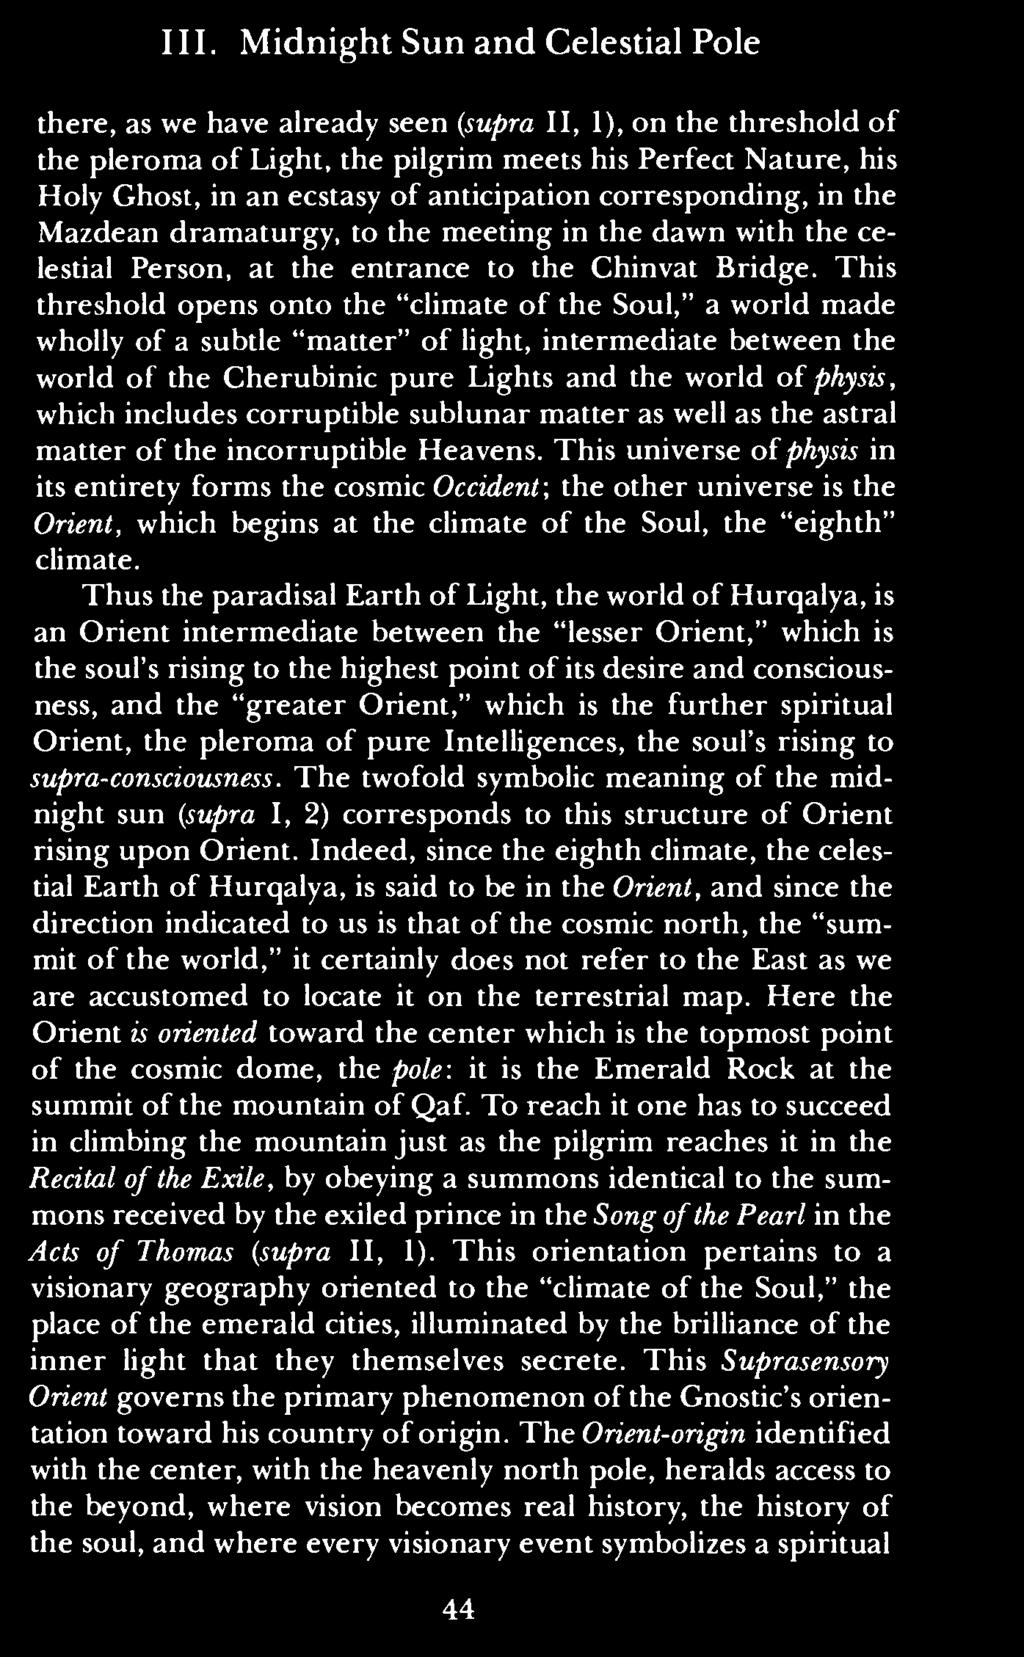 This threshold opens onto the "climate of the Soul," a world made wholly of a subtle "matter" of light, intermediate between the world of the Cherubinic pure Lights and the world of physis, which